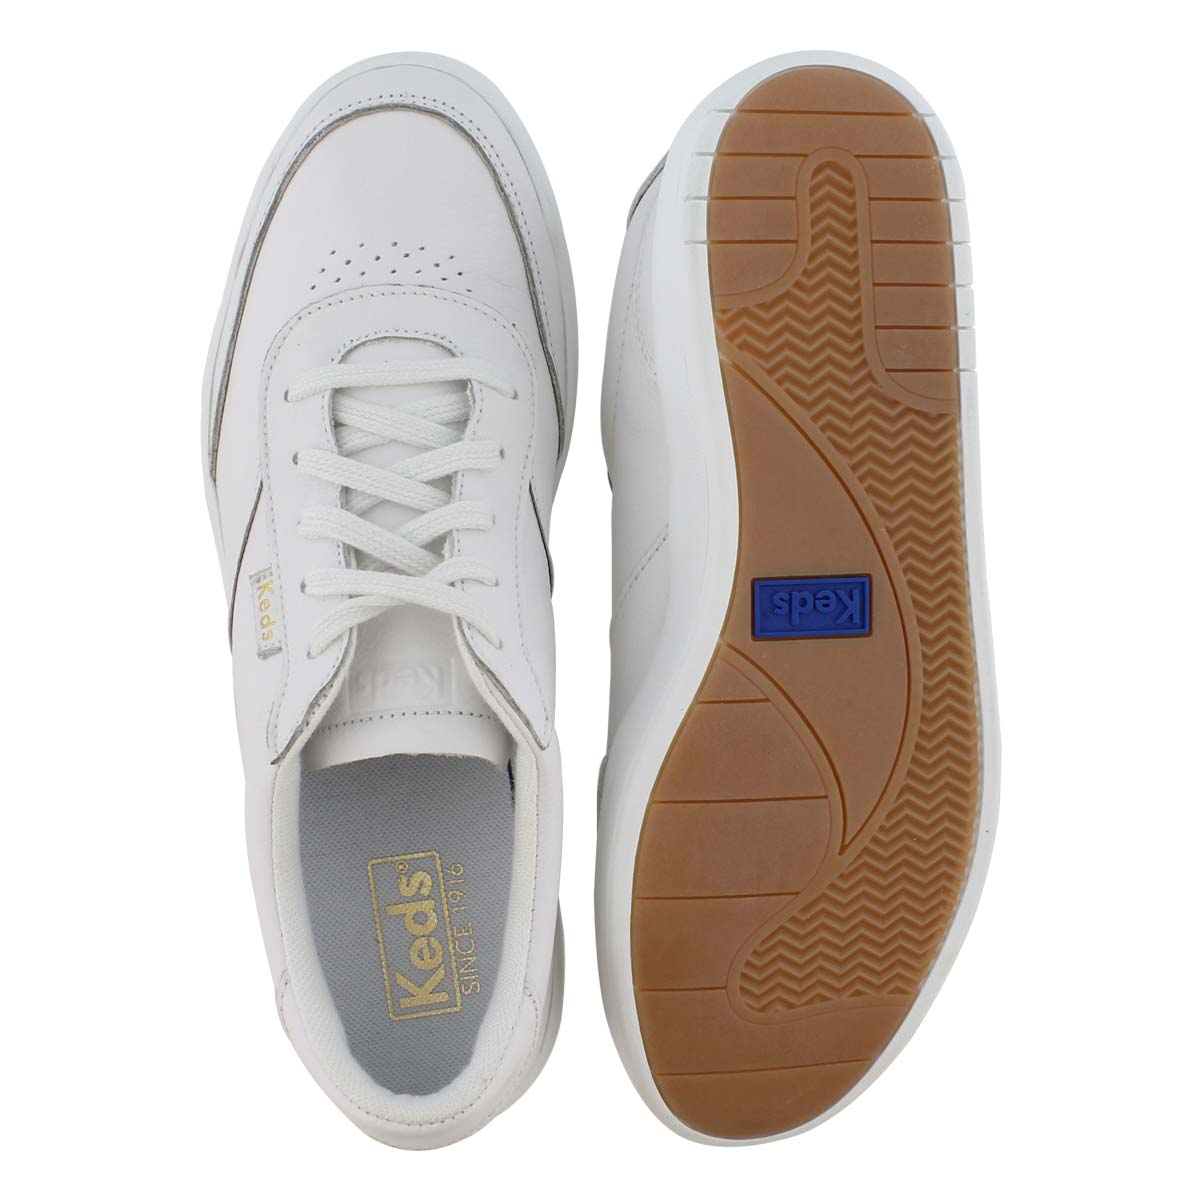 keds match point leather sneakers